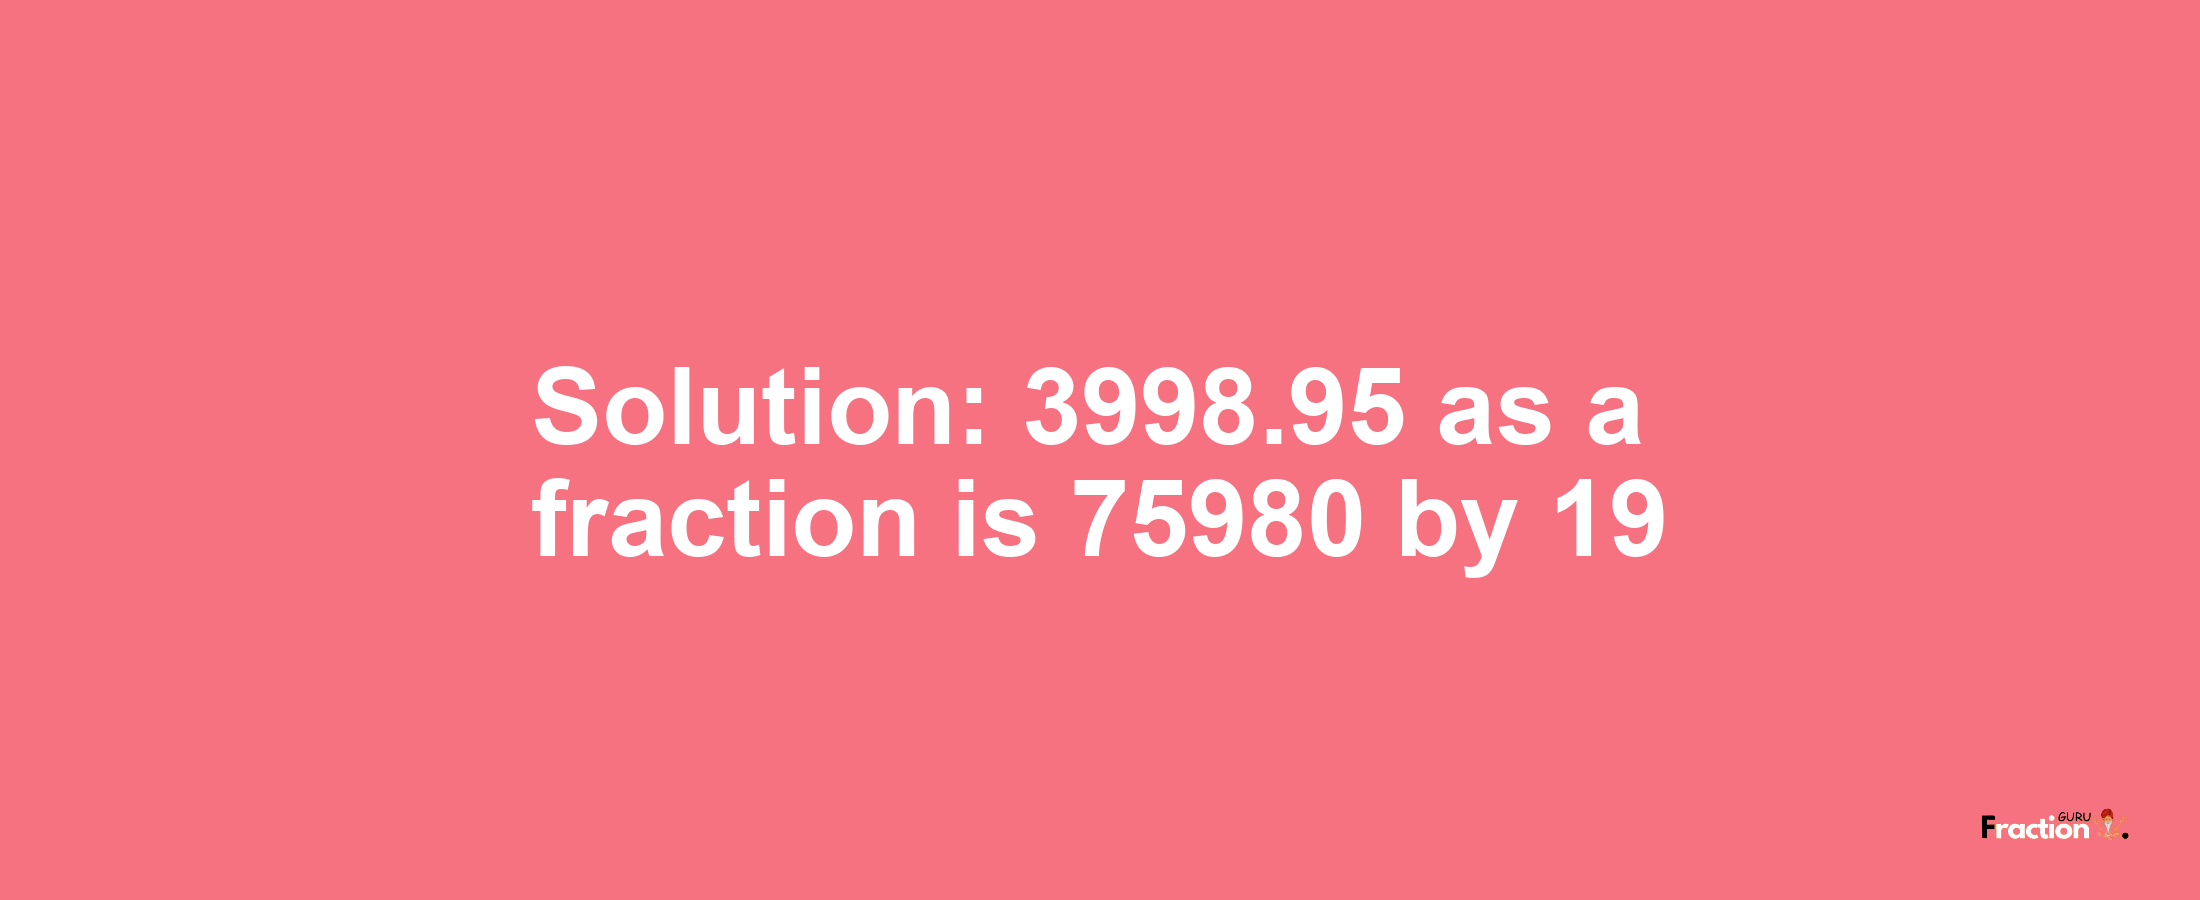 Solution:3998.95 as a fraction is 75980/19